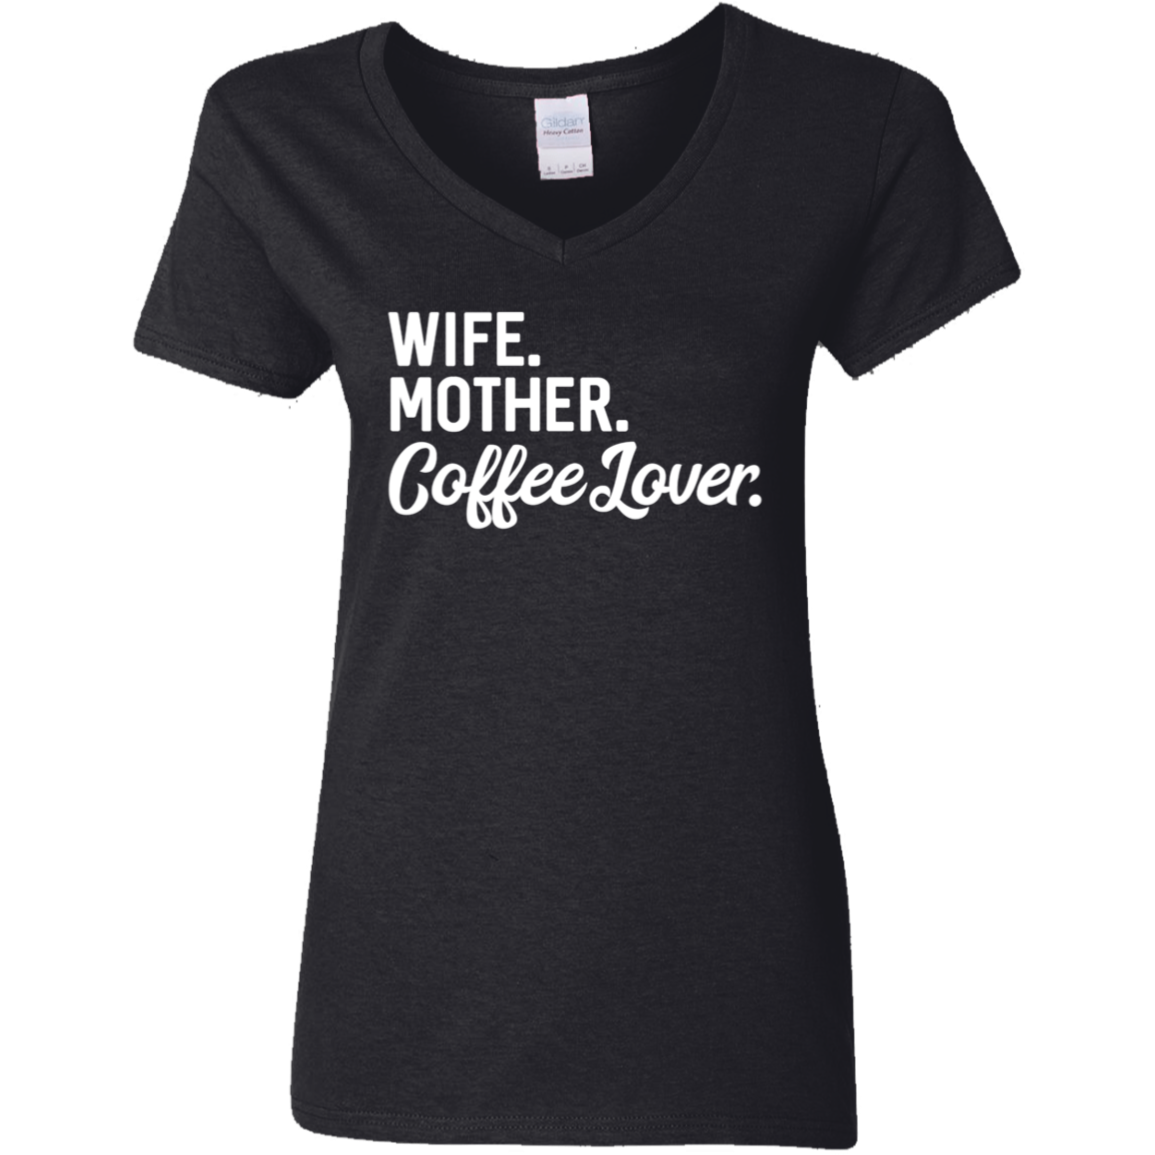 Wife, Mother, Coffee Lover T-Shirt